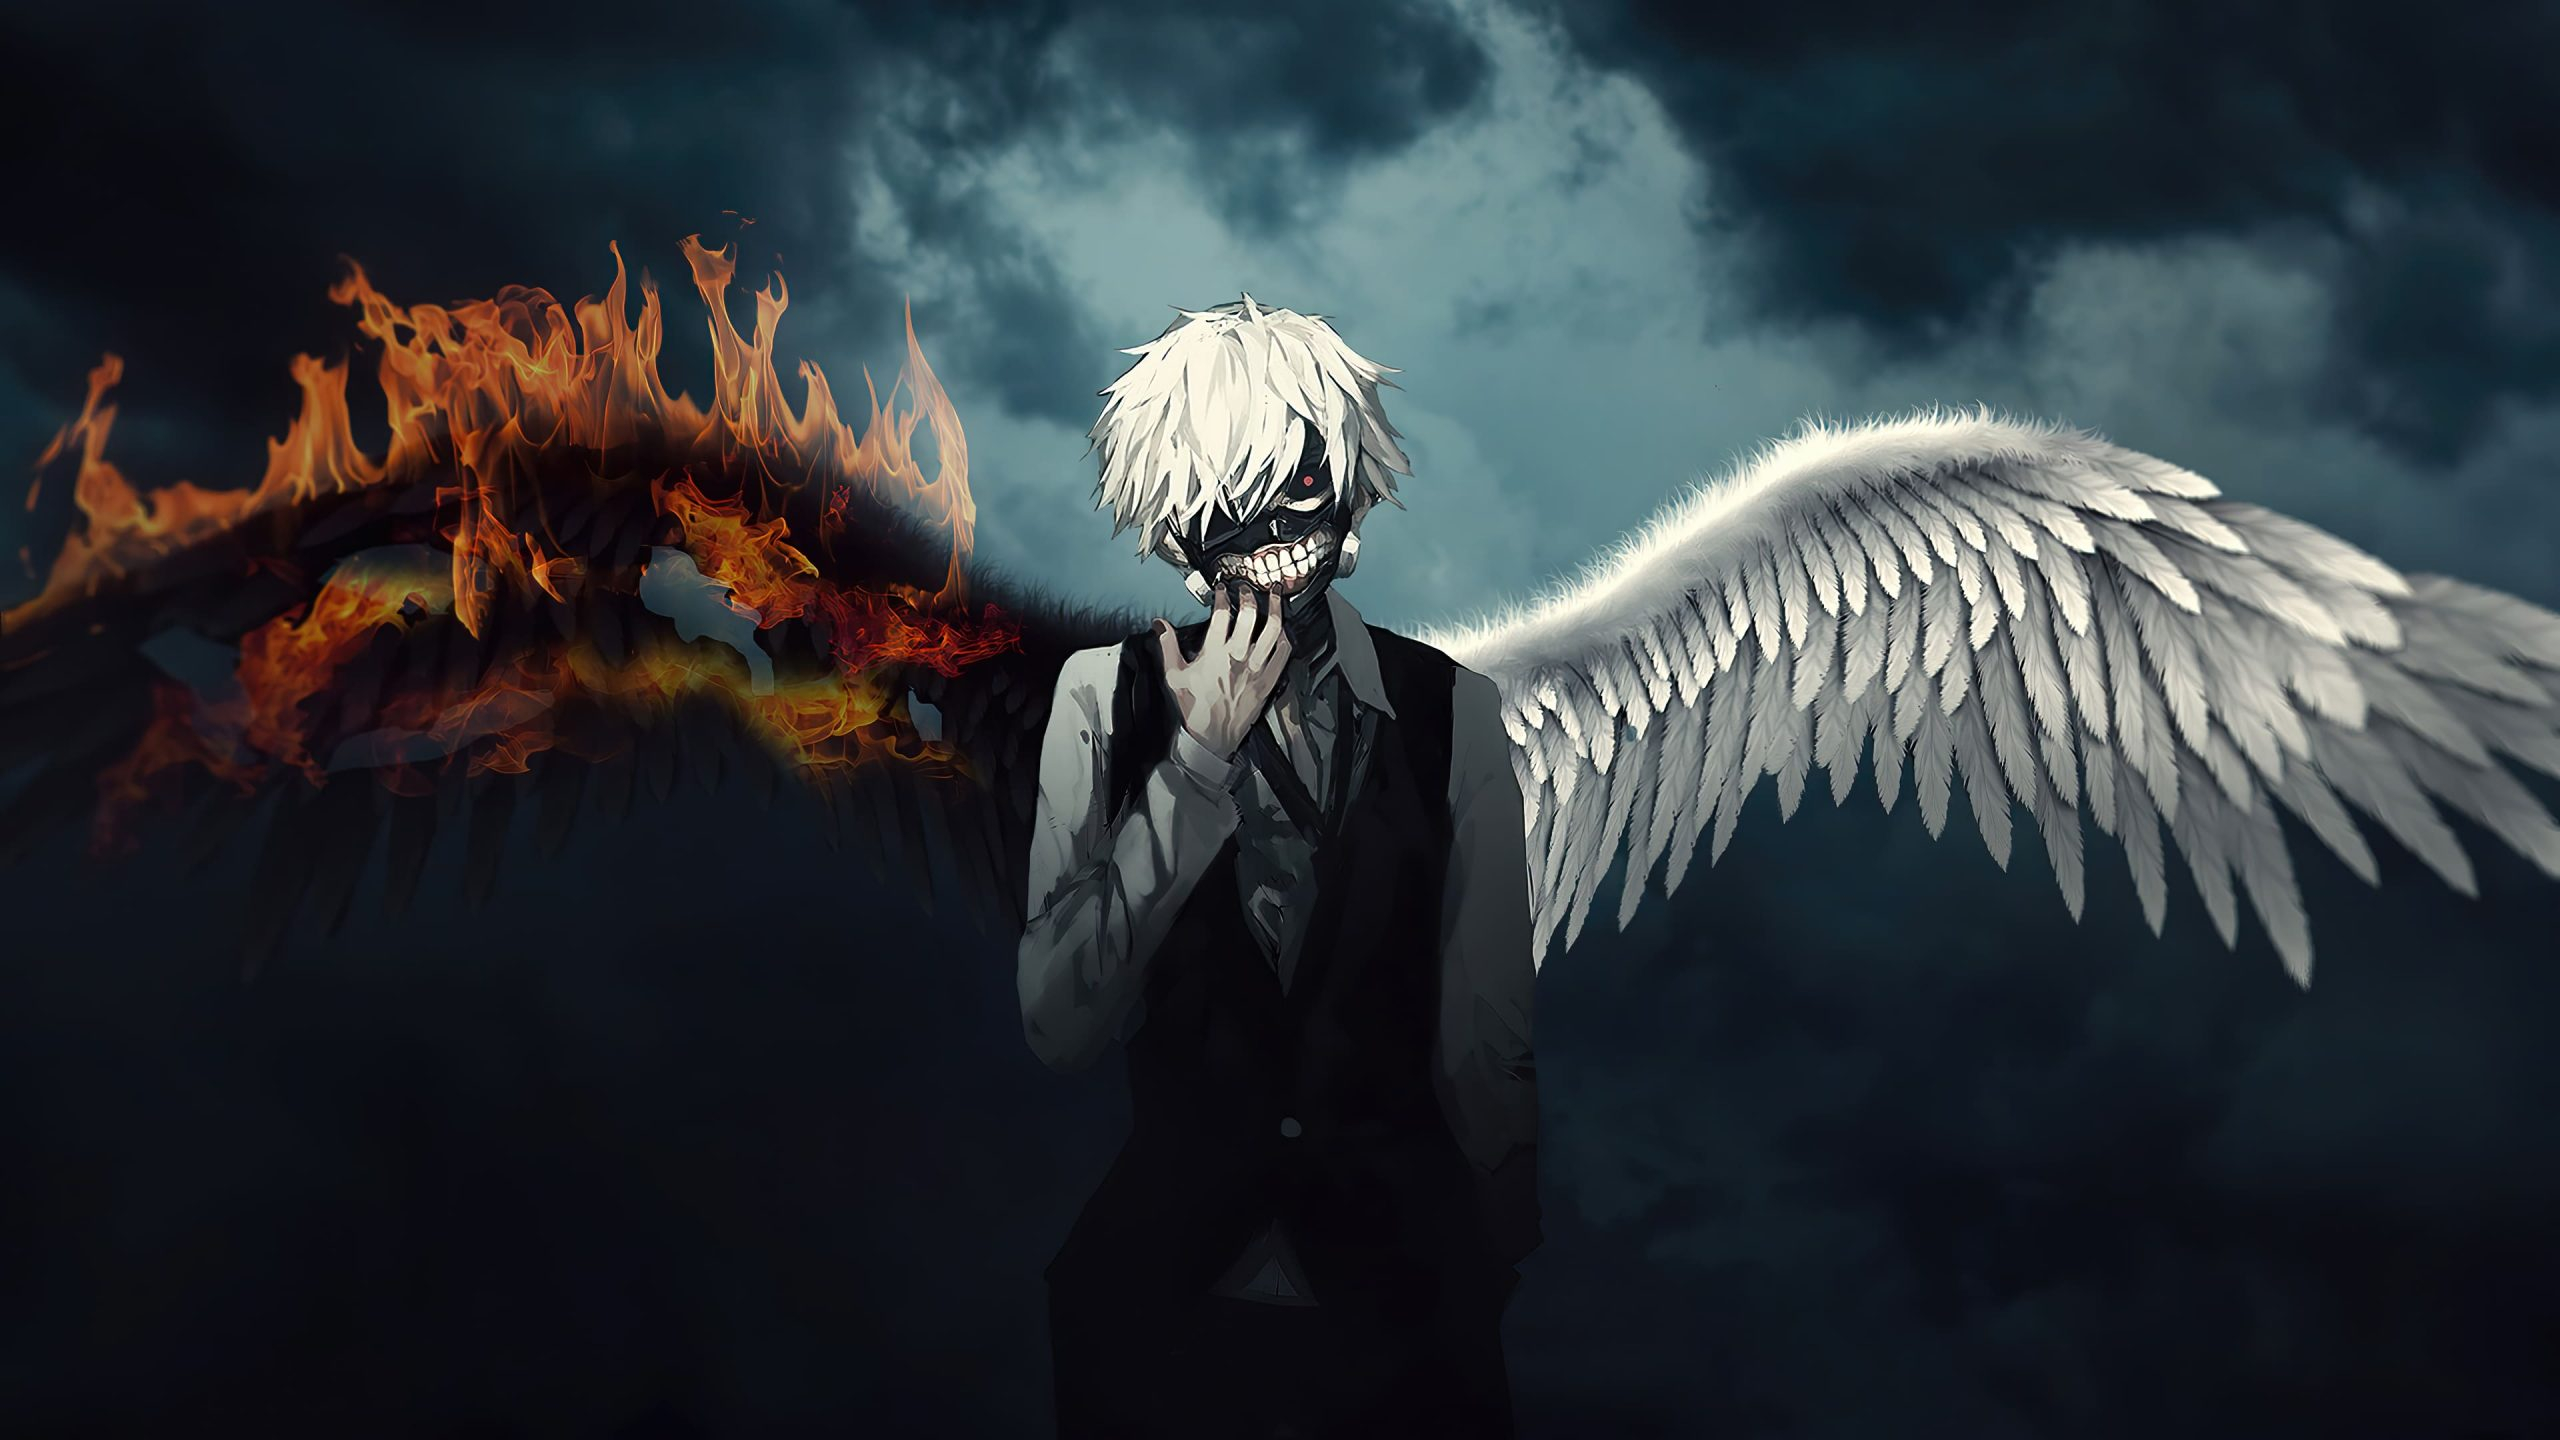 2560x1440 Tokyo Ghoul Wallpapers Top Best 65 Best Tokyo Ghoul Backgrounds Dowload